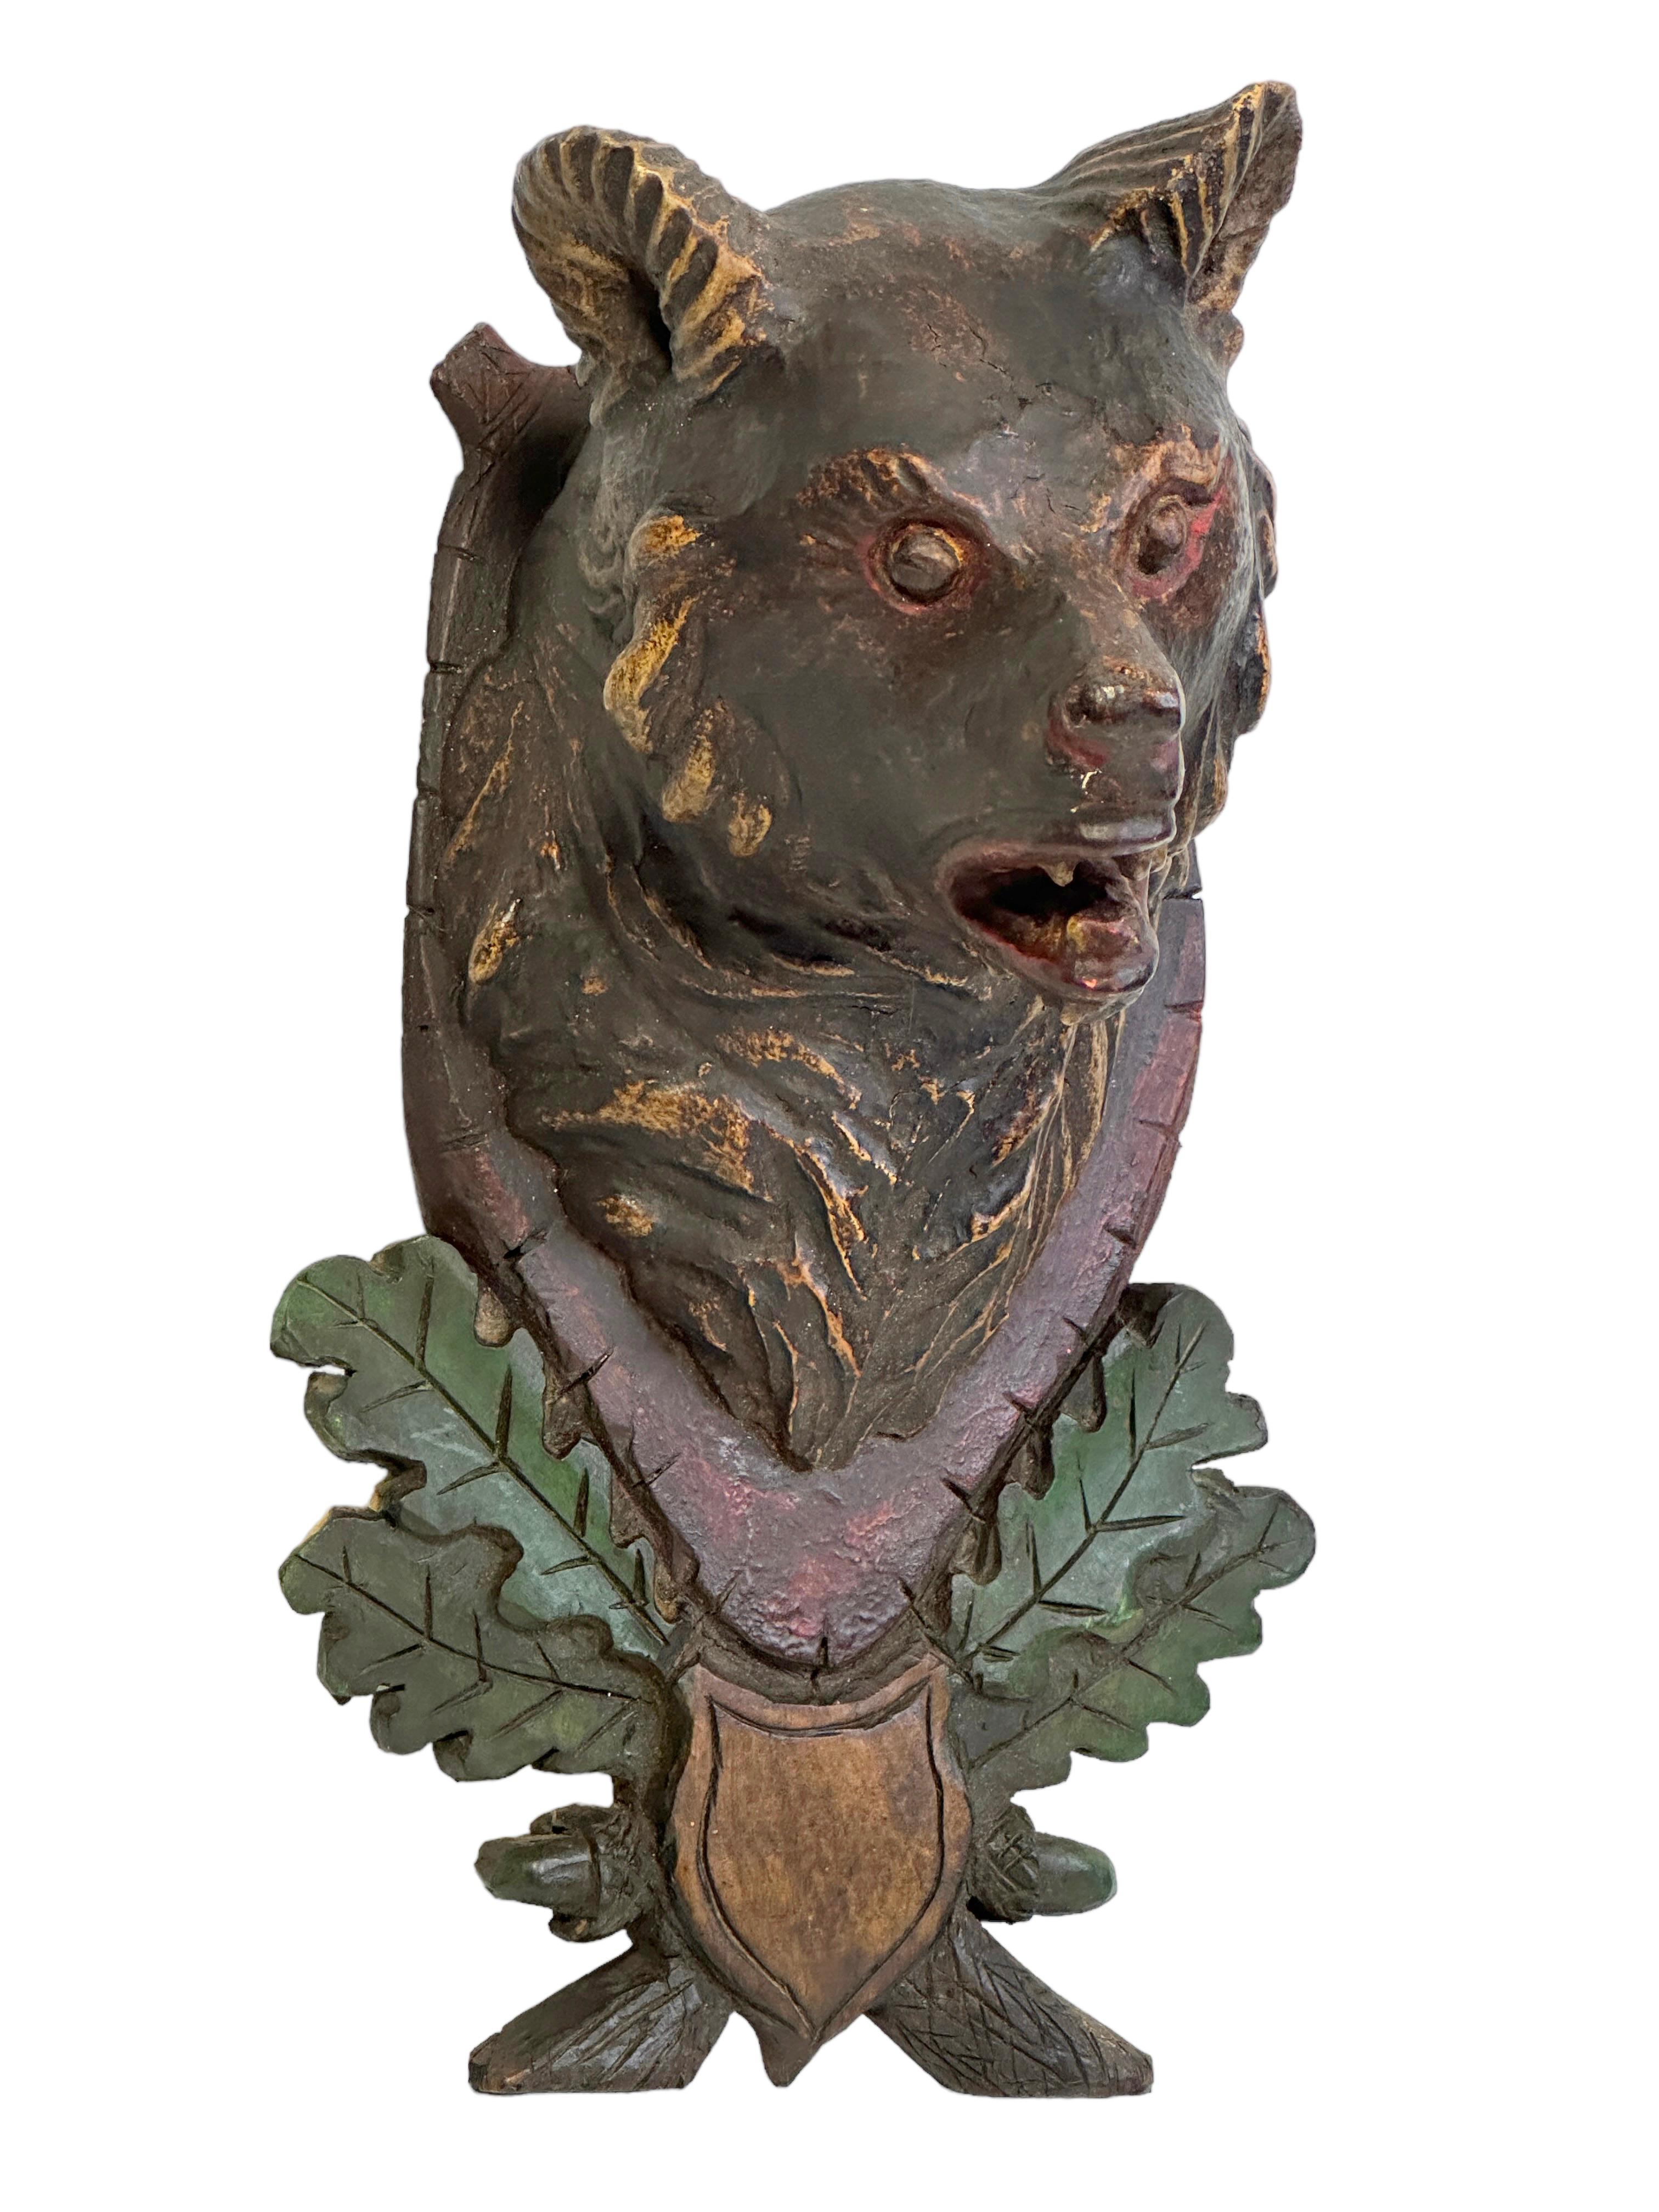 A great looking hand carved original wooden Folk Art Bear head wall decoration. A great piece for a suitable ambiance in a trophy room or the office of a Hunter or Woodsman. More than likely one of the Folk Art items made between 1860 and the late